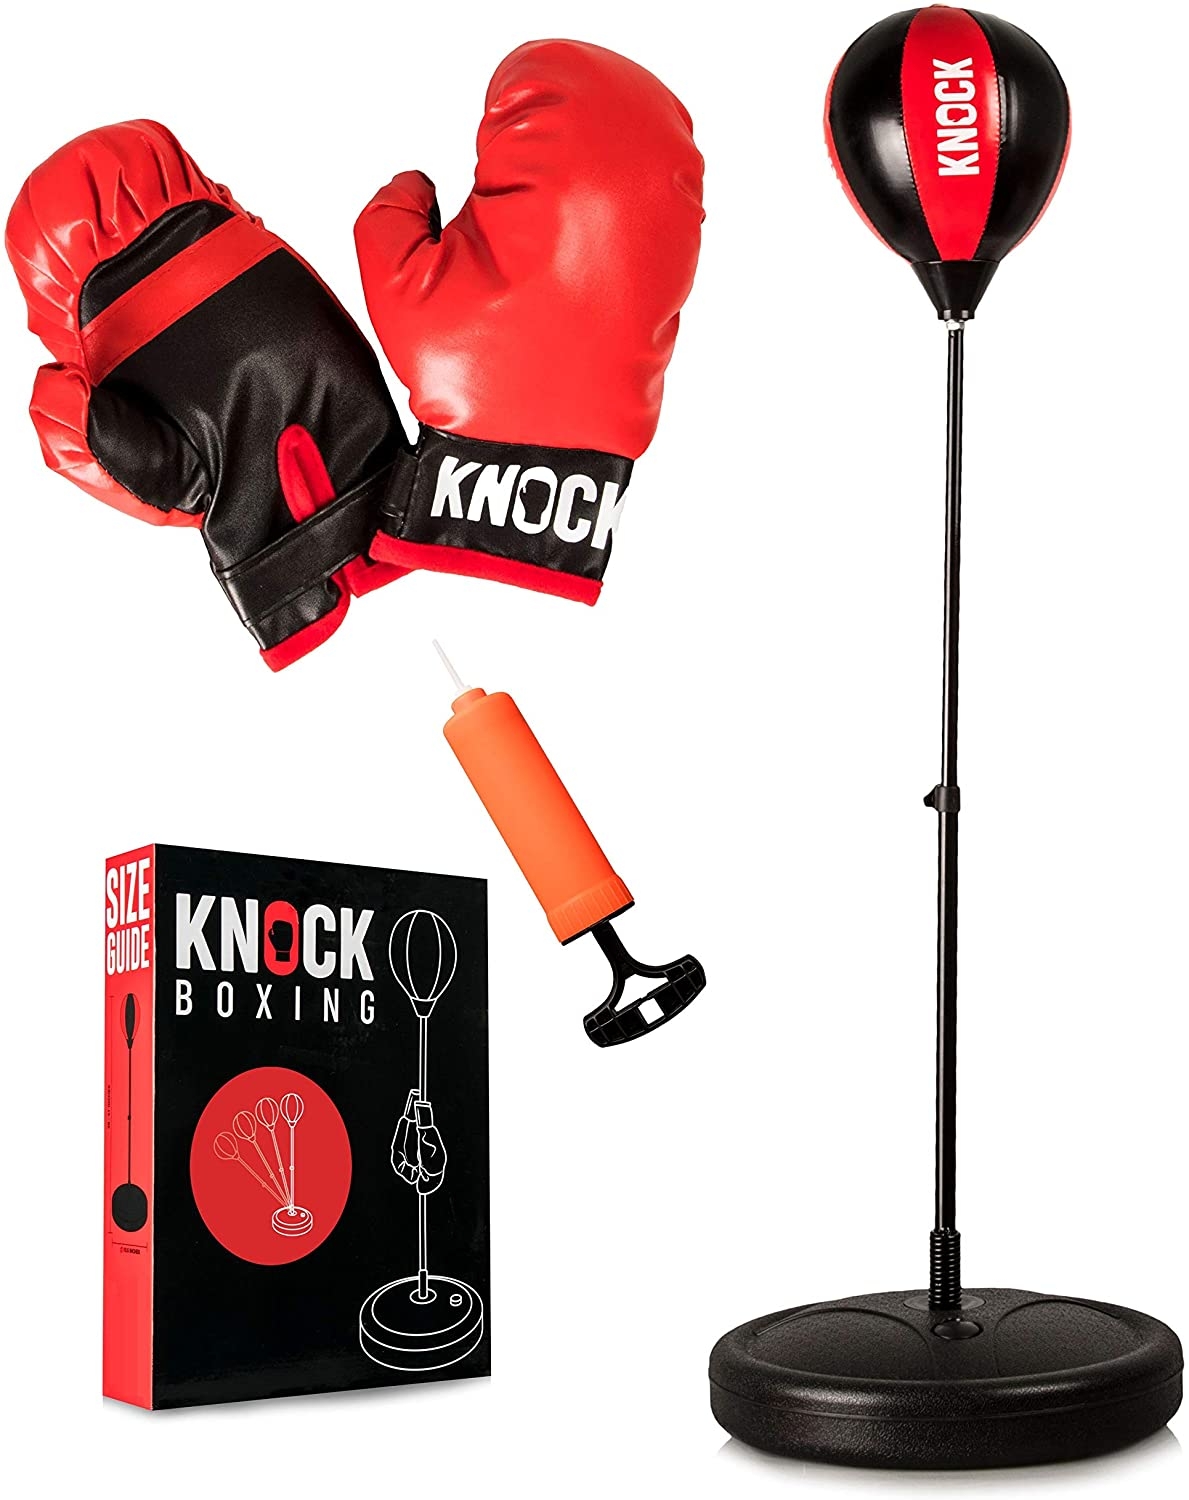 Indoor Punching Bag for Kids - Home Gym Youth Workout Equipment - Complete Boxing Set Includes Gloves &amp; Small Pump - Free Standing Bag with Adjustable Height - Great Gift Idea for Boys or Girls